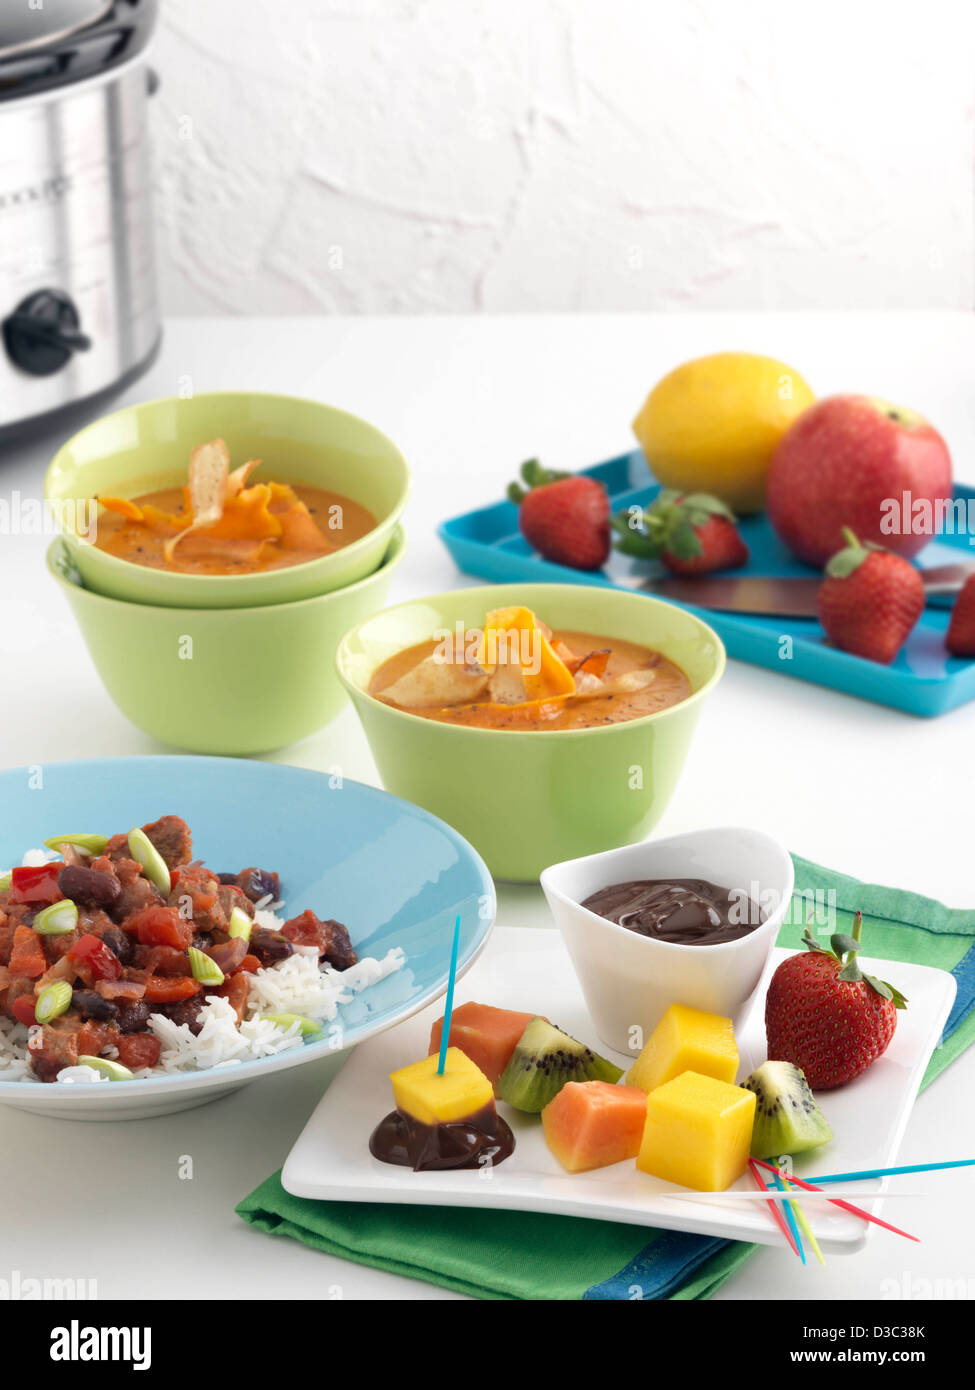 Slow cooker with slow cooked recipes food dishes Stock Photo